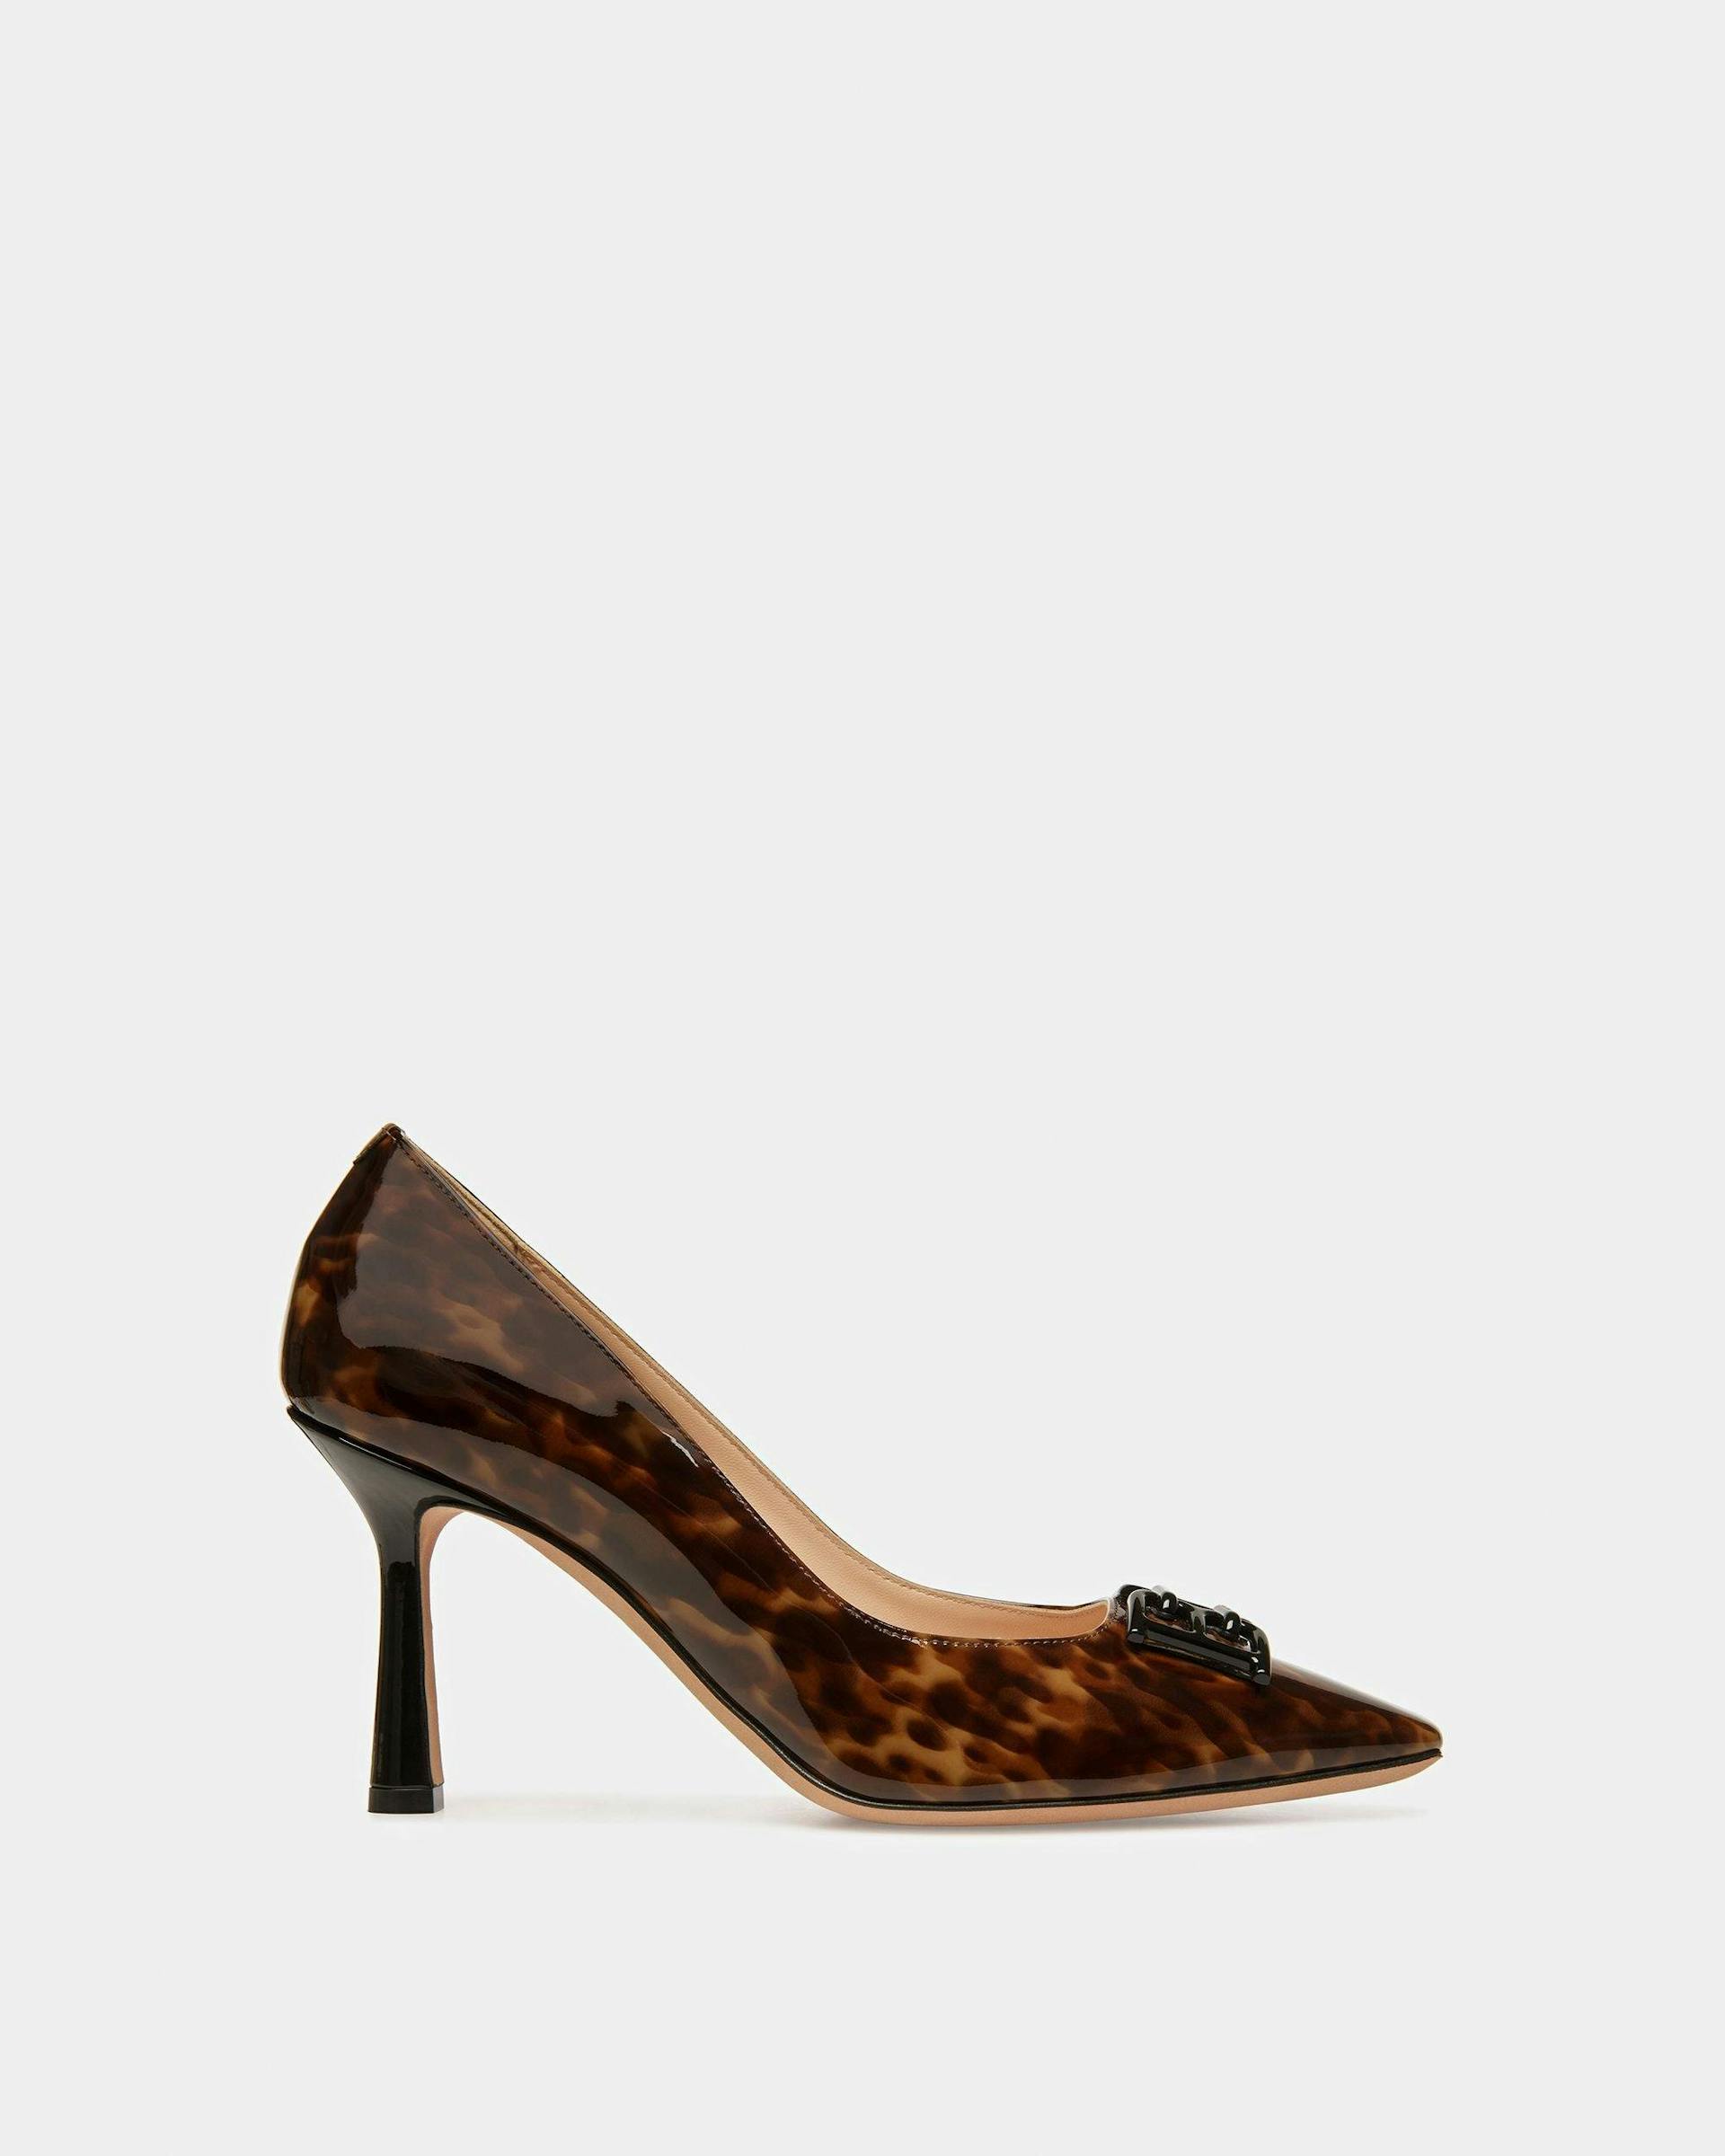 Evanca Leather Pumps In Black And Brown - Women's - Bally - 01